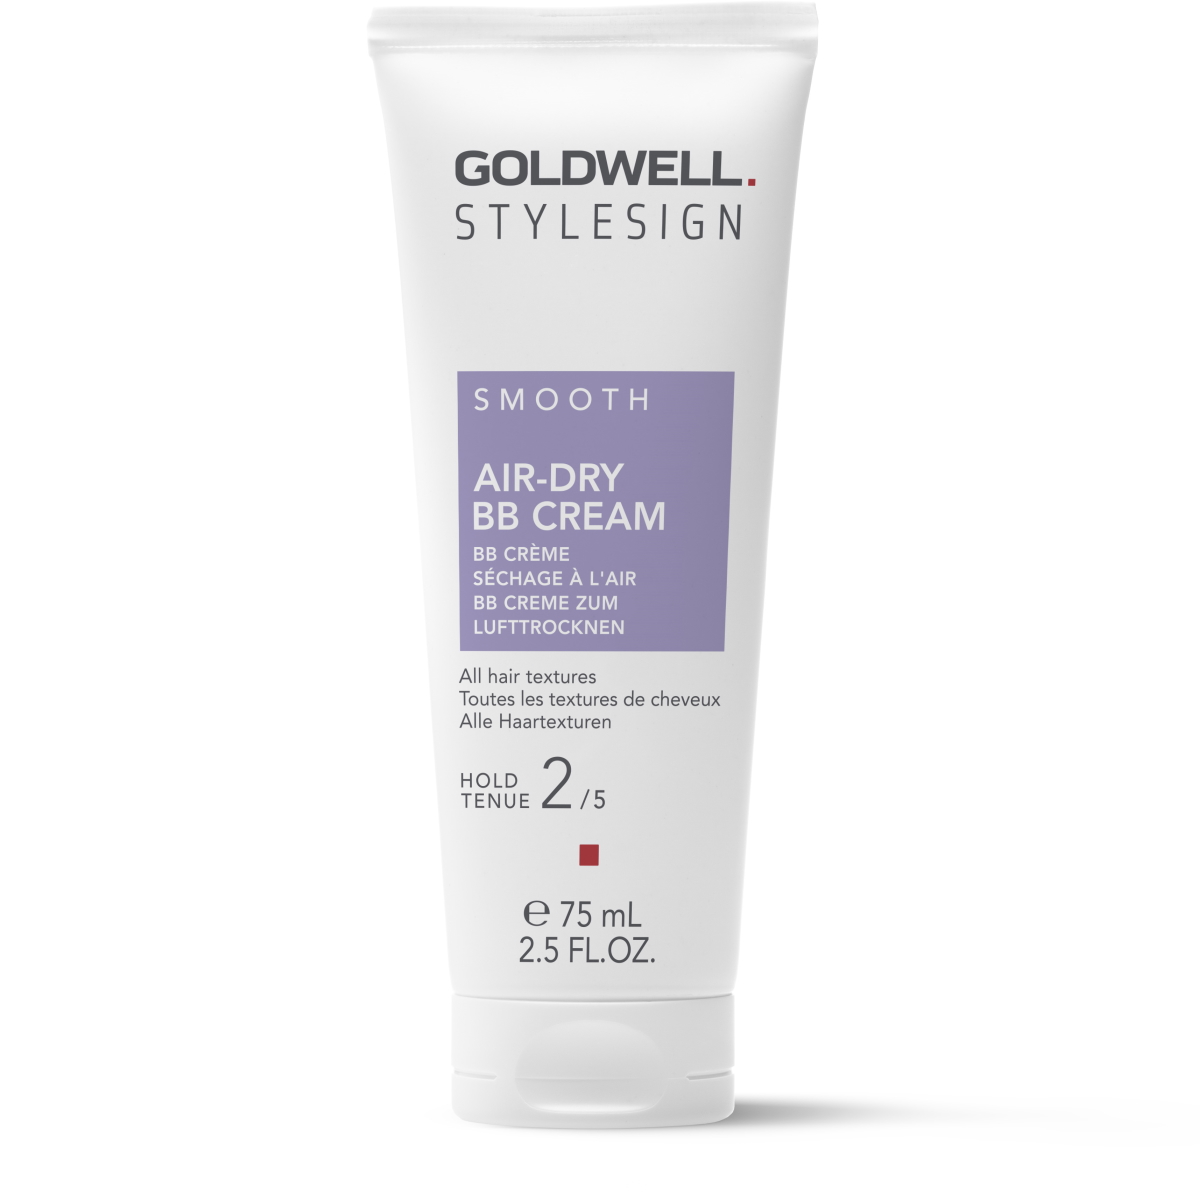 Goldwell Style Sign Smooth Air-Dry BB Cream 75ml